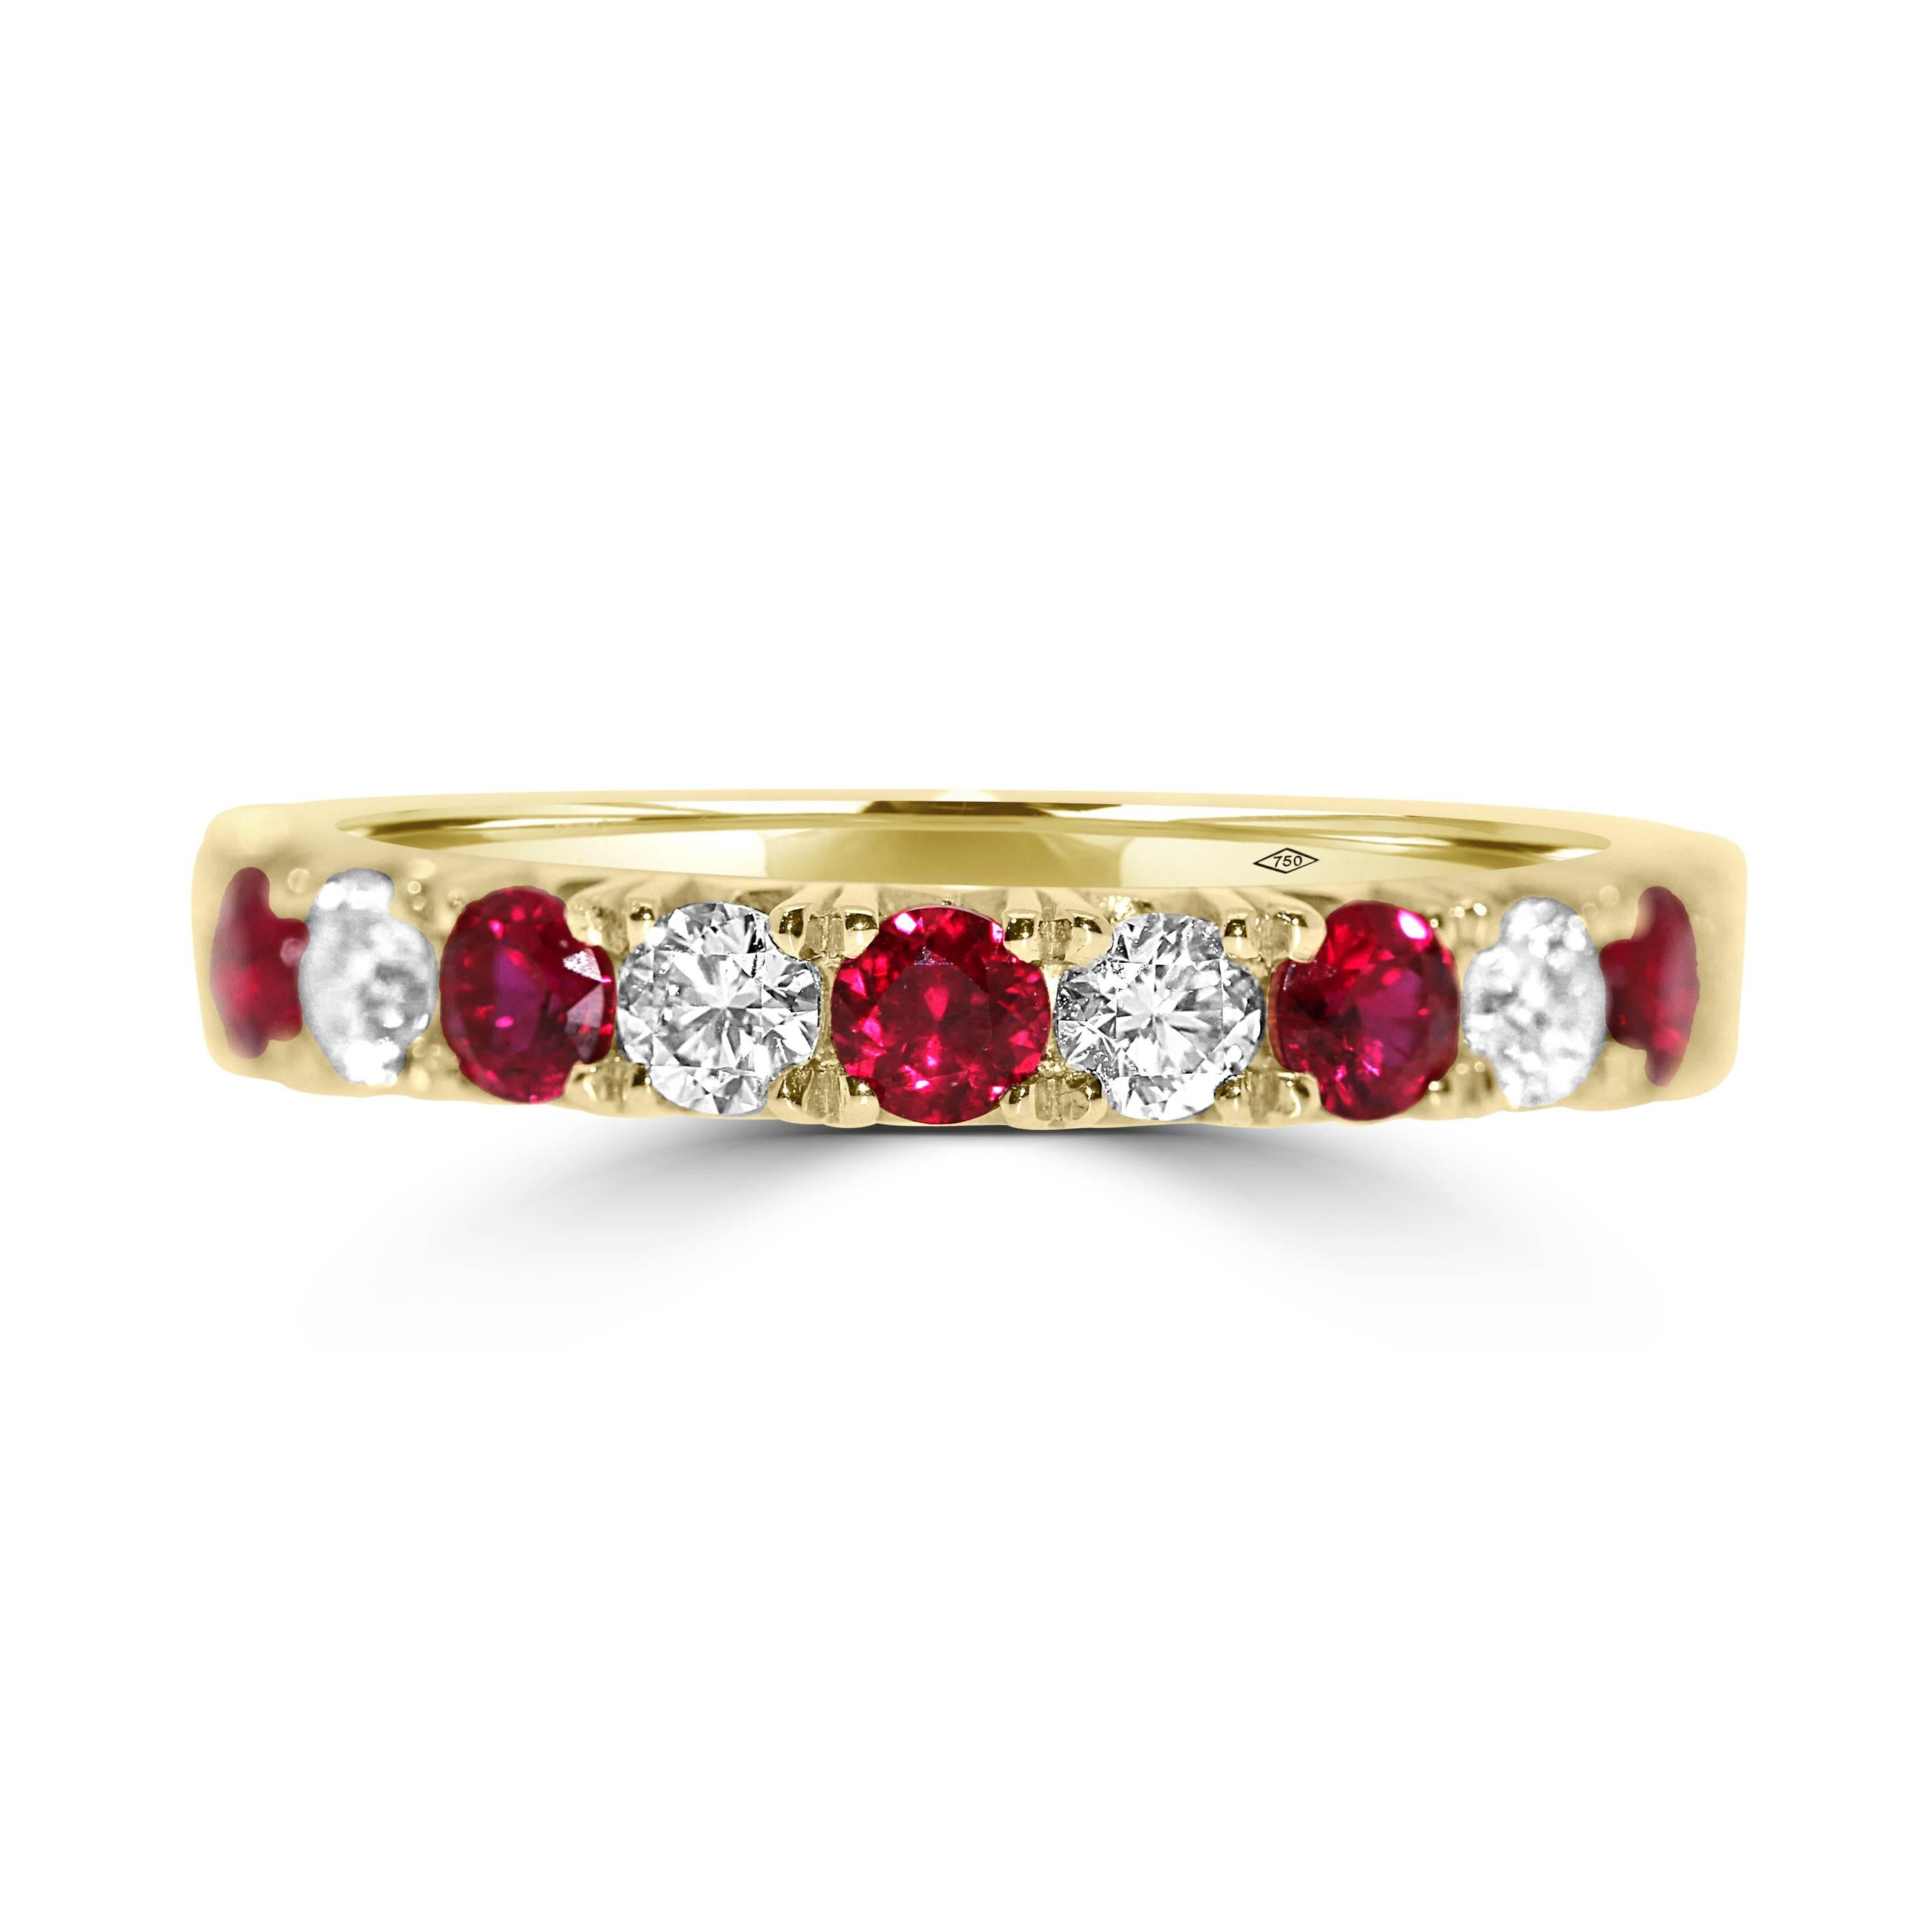 elegant and classy eternity band,
half set with brilliant cut diamonds of 0.51ct total and ruby gemstones of 0.59ct total, mounted in 18kt rose gold.
Winston special setting.